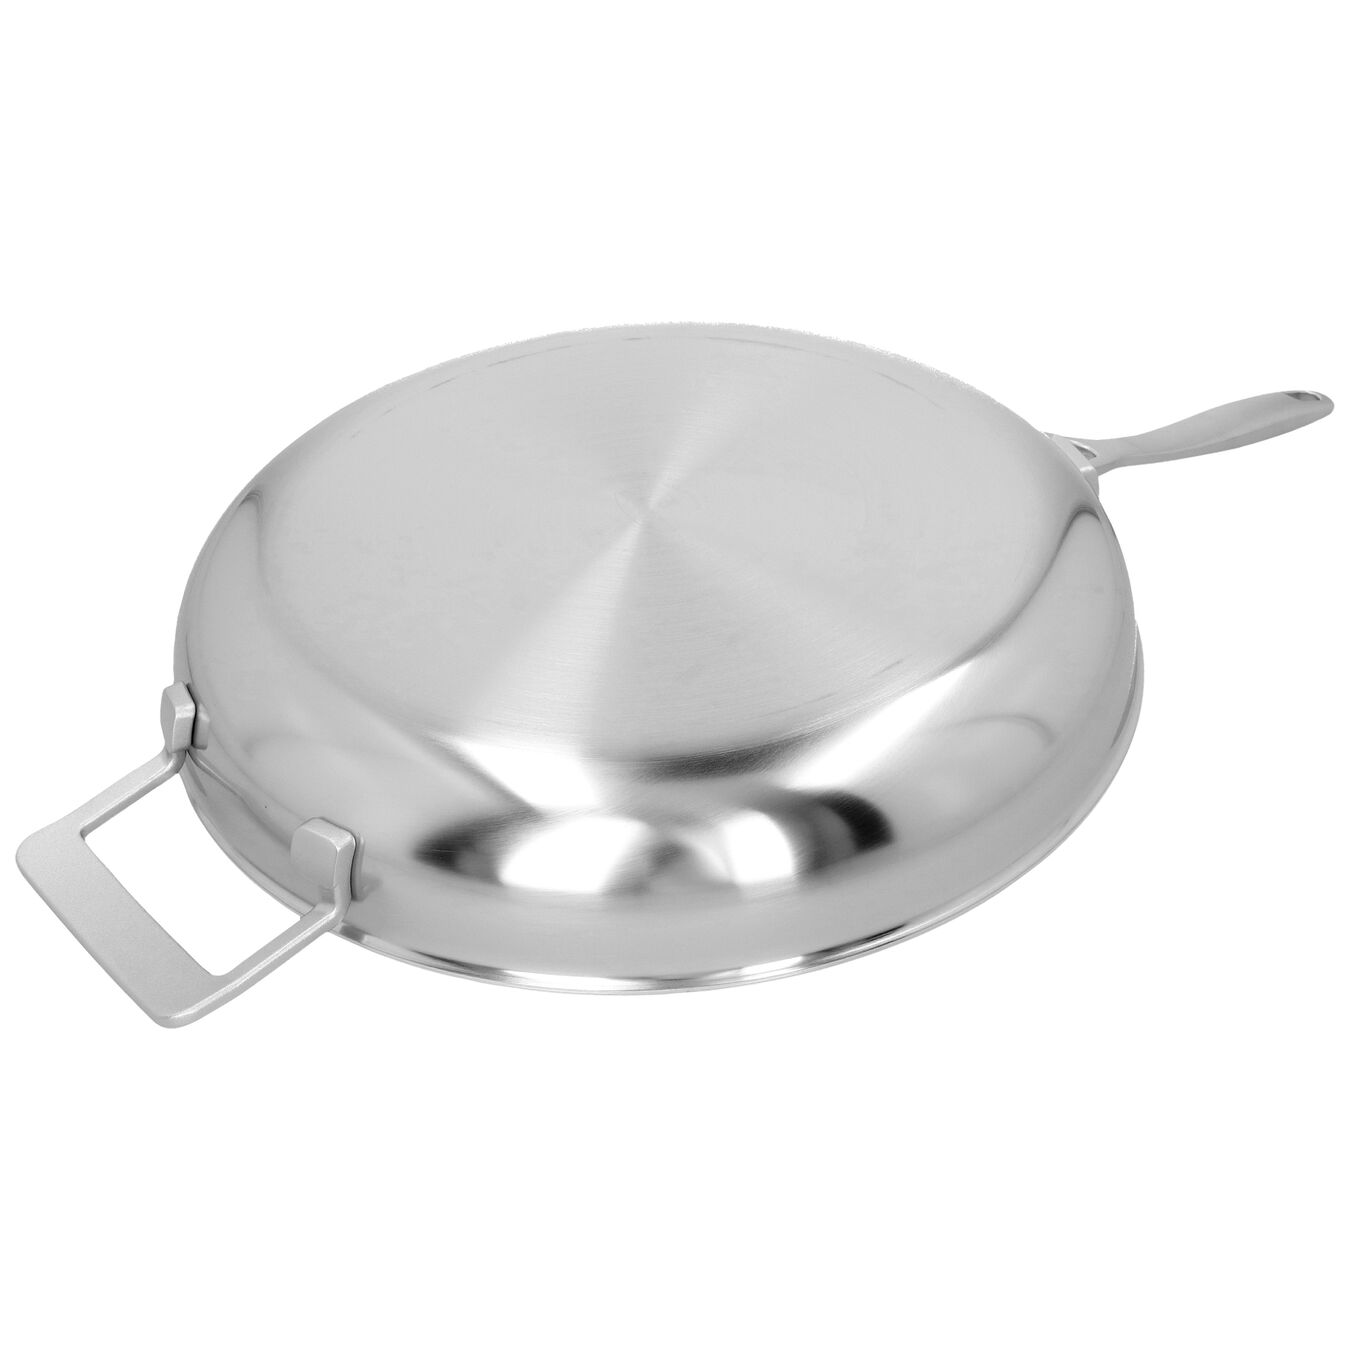 12.5-inch, 18/10 Stainless Steel, Fry Pan with Helper Handle,,large 4